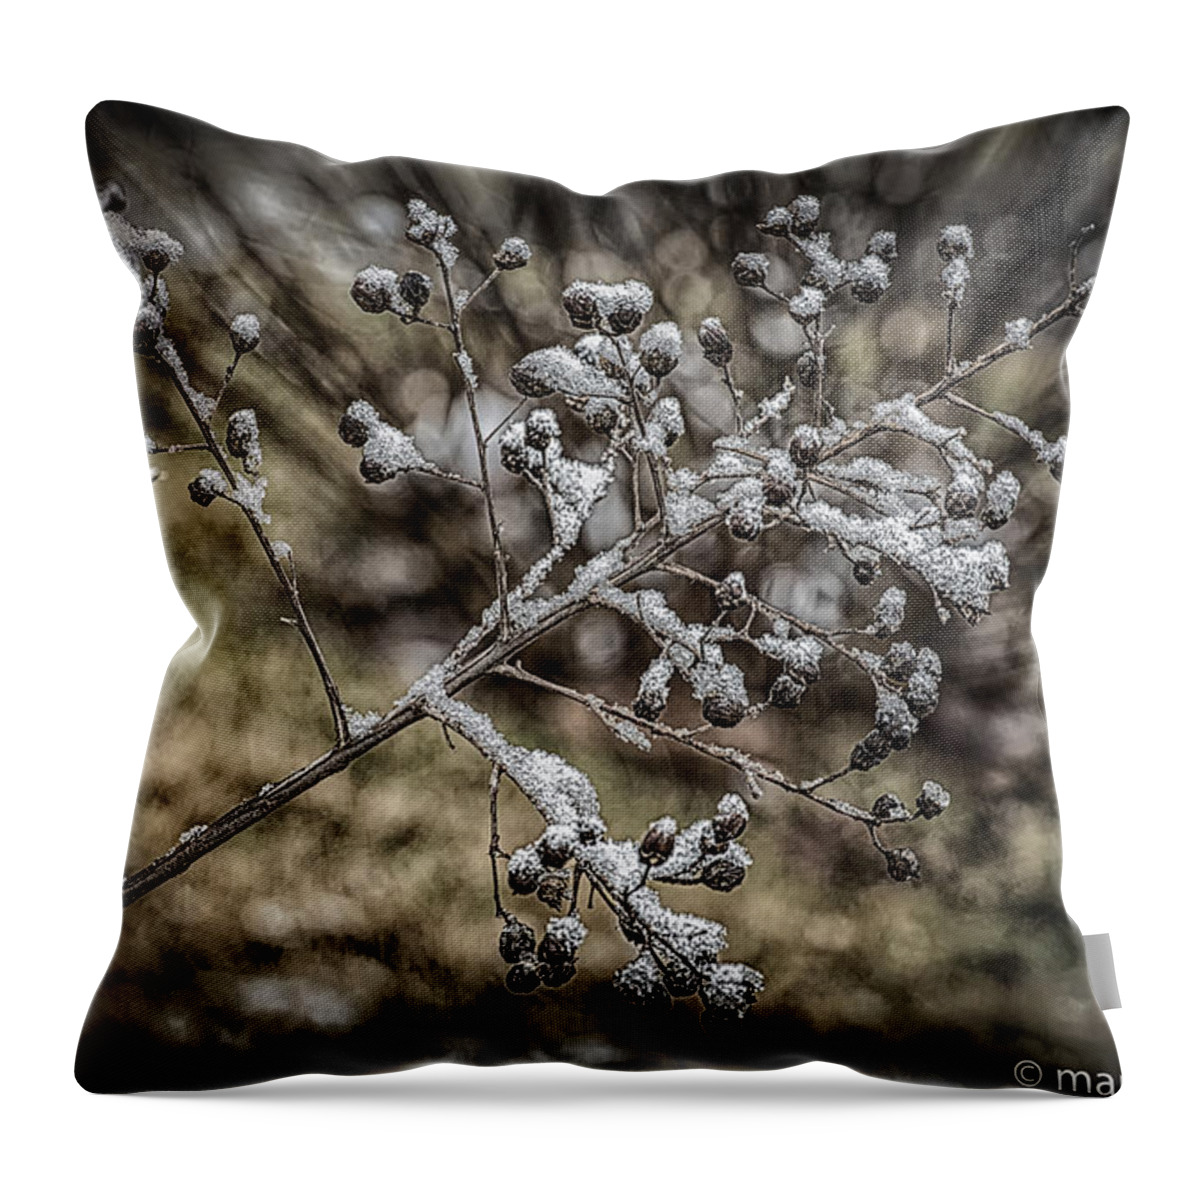 Frozen Berries Throw Pillow featuring the photograph Frozen Berries by Mark Peavy